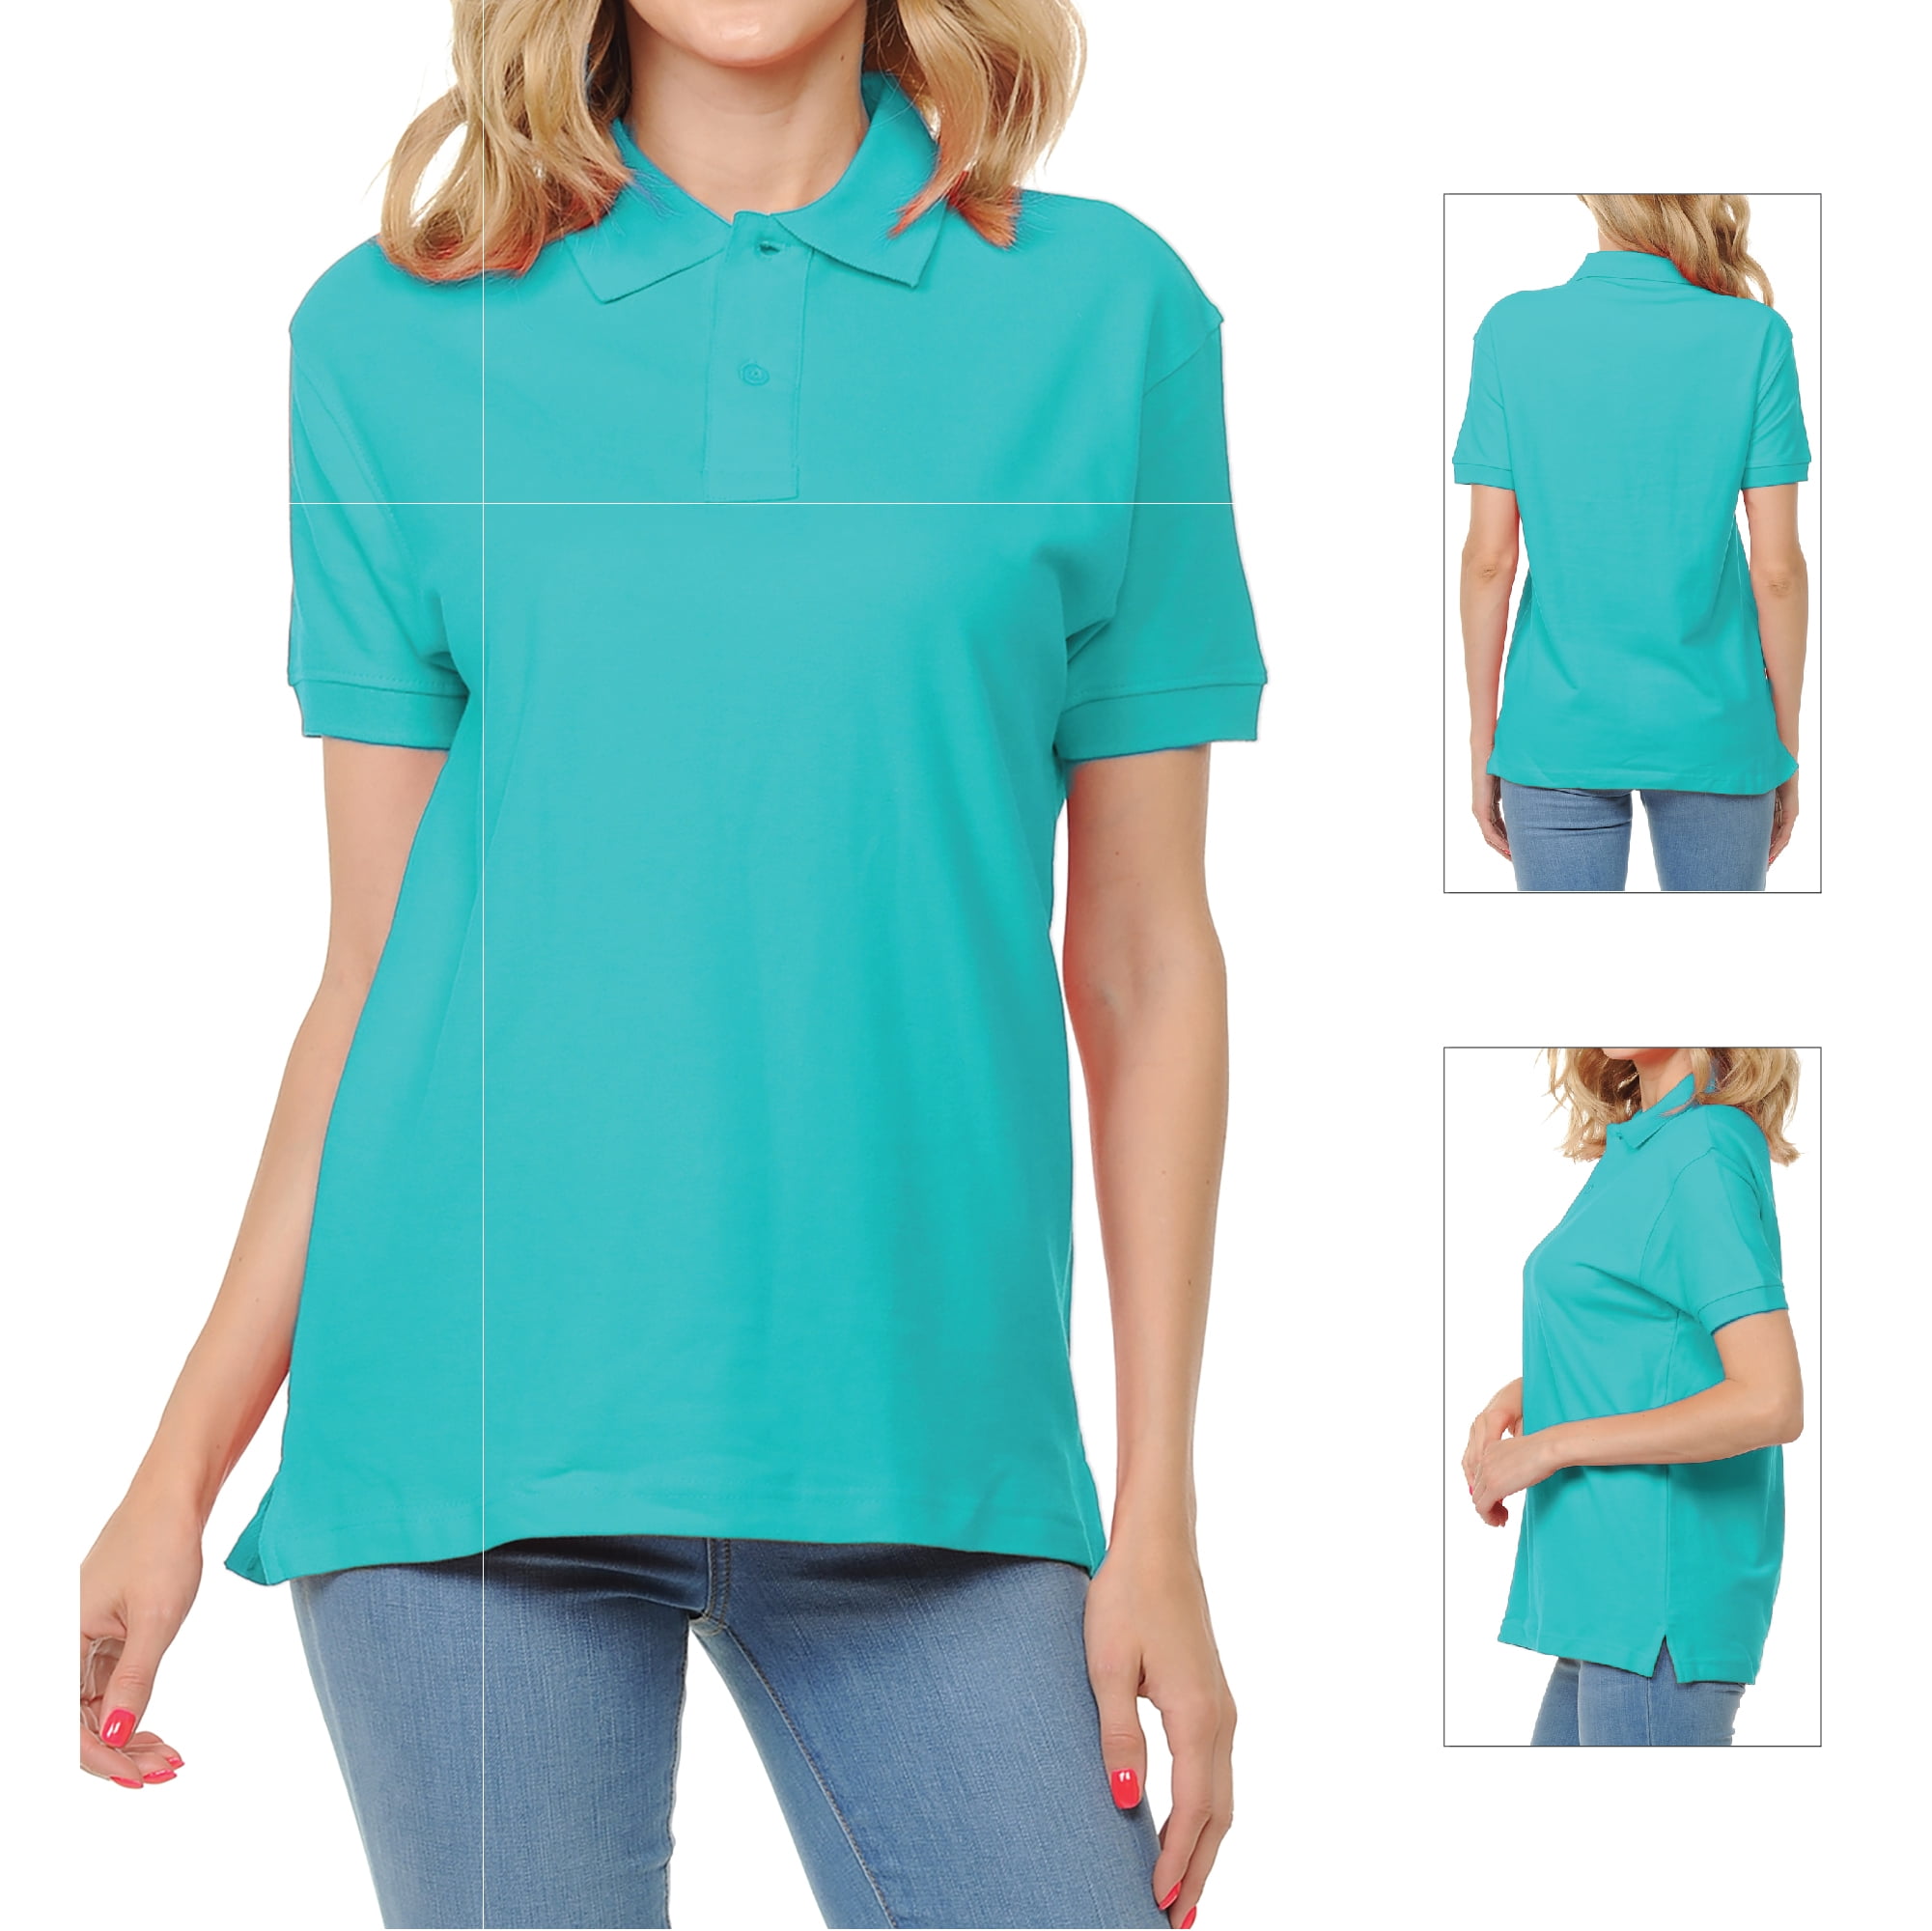 Basico Turquoise Polo Collared Shirts For Women 100% Cotton Short ...